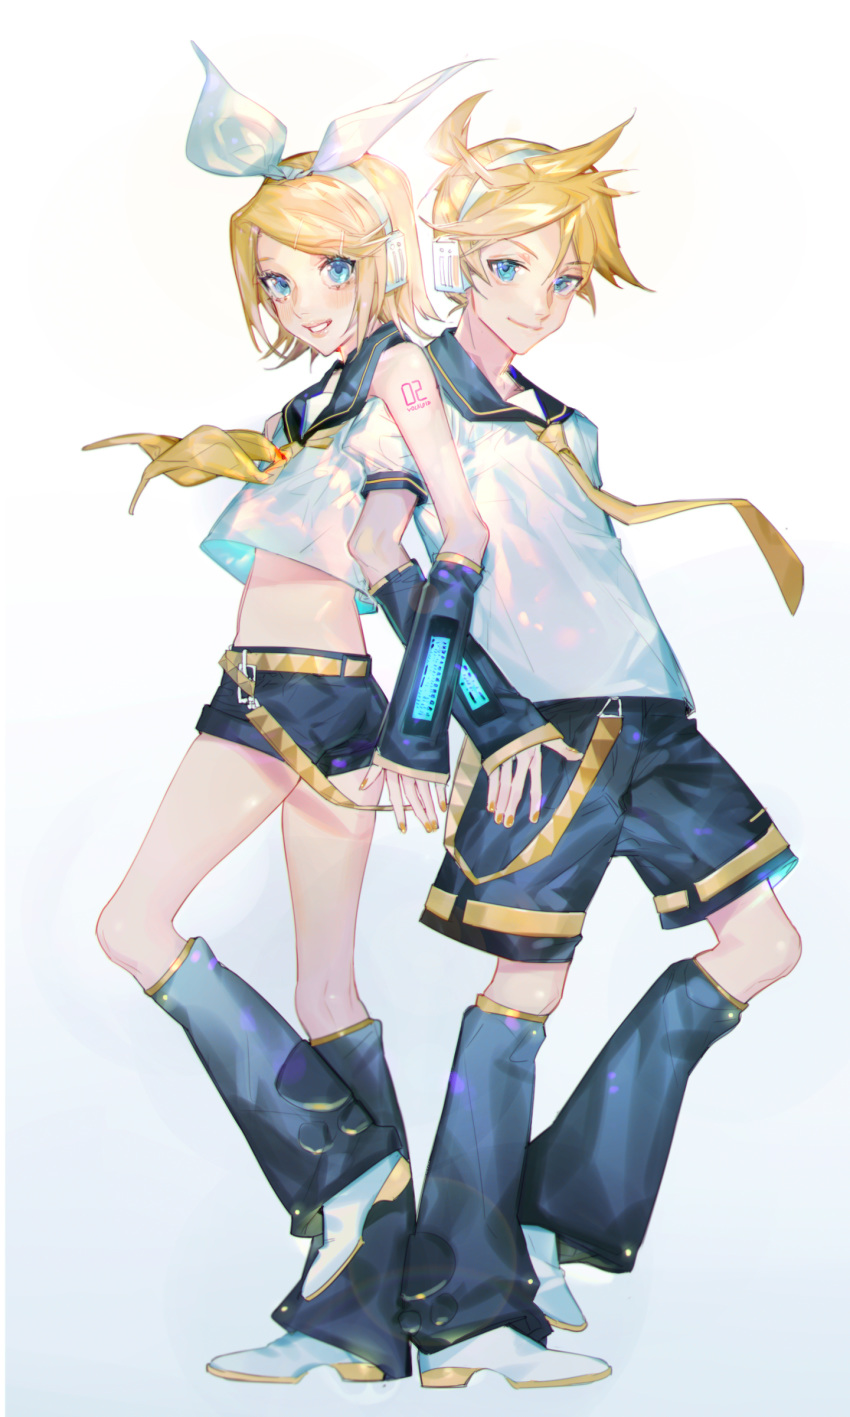 1boy 1girl absurdres back-to-back bangs belt black_collar black_shorts black_sleeves blonde_hair blue_eyes bow collar commentary crop_top derivative_work detached_sleeves forcharon full_body grey_collar grey_shorts grey_sleeves grin hair_bow hair_ornament hairclip headphones heel_up highres kagamine_len kagamine_rin leg_warmers lips looking_at_viewer midriff nail_polish neckerchief necktie sailor_collar school_uniform shirt short_hair short_ponytail short_shorts short_sleeves shorts simple_background smile spiky_hair standing swept_bangs vocaloid vocaloid_boxart_pose white_background white_bow white_footwear white_shirt yellow_nails yellow_neckwear